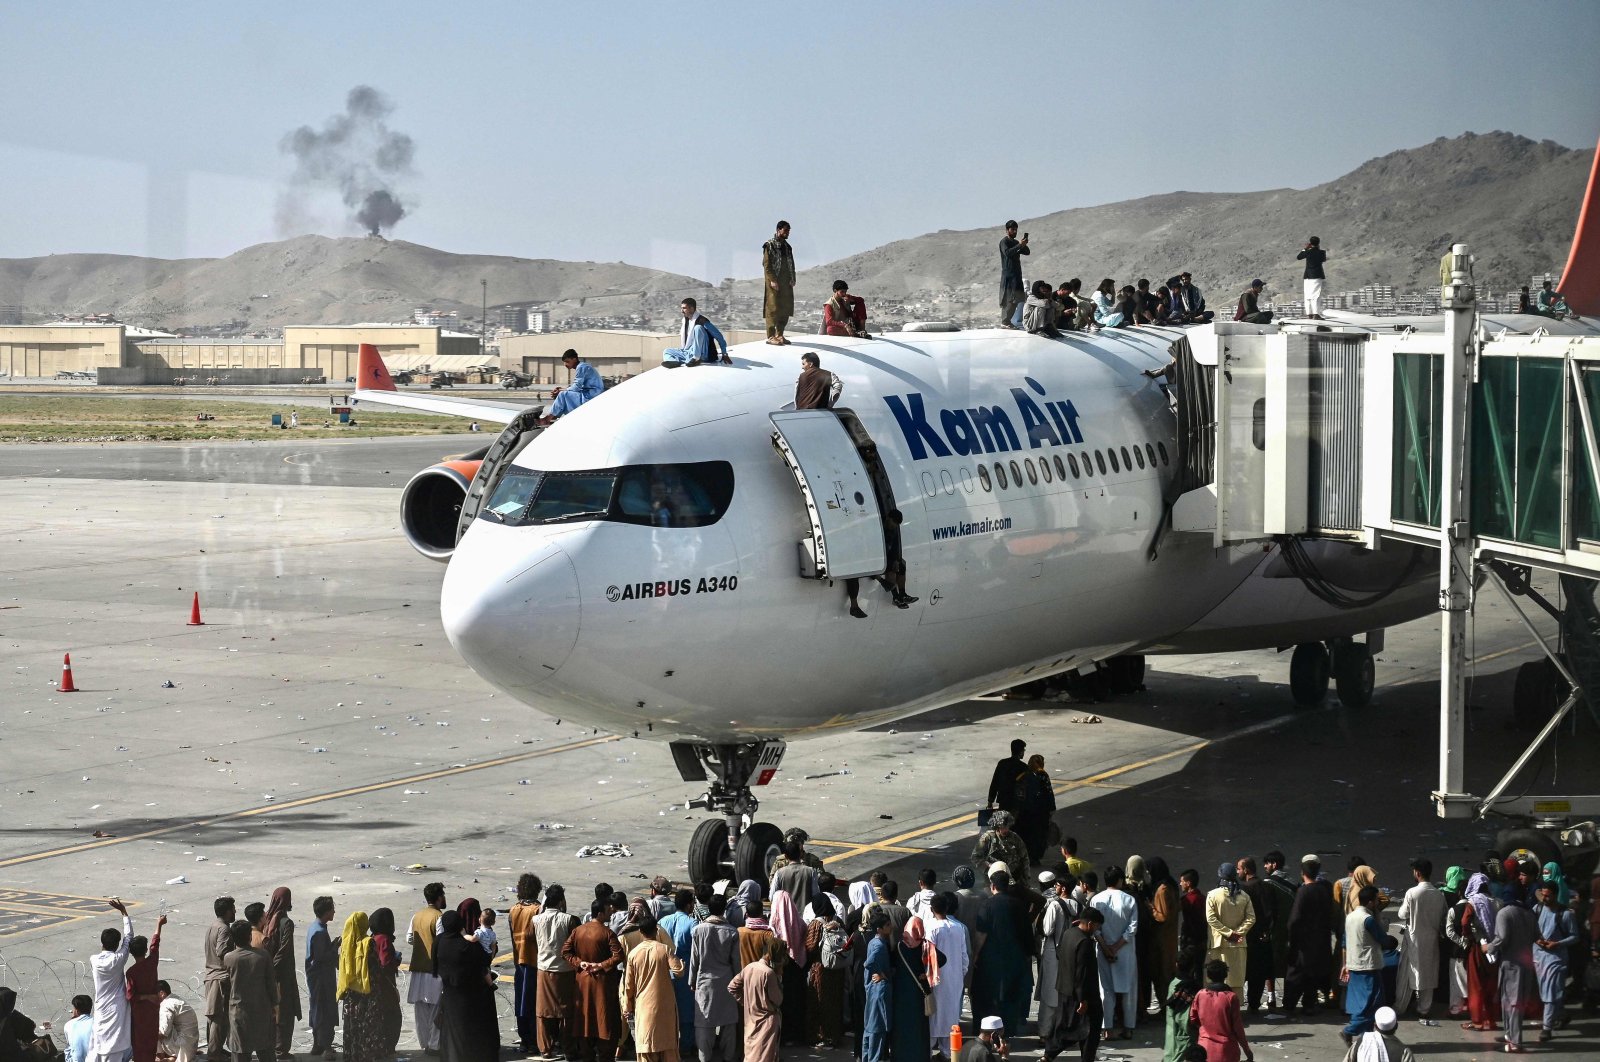 Afghan people climb atop a plane as they wait at the Kabul airport in Kabul, Afghanistan, on Aug. 16, 2021. (AFP Photo)